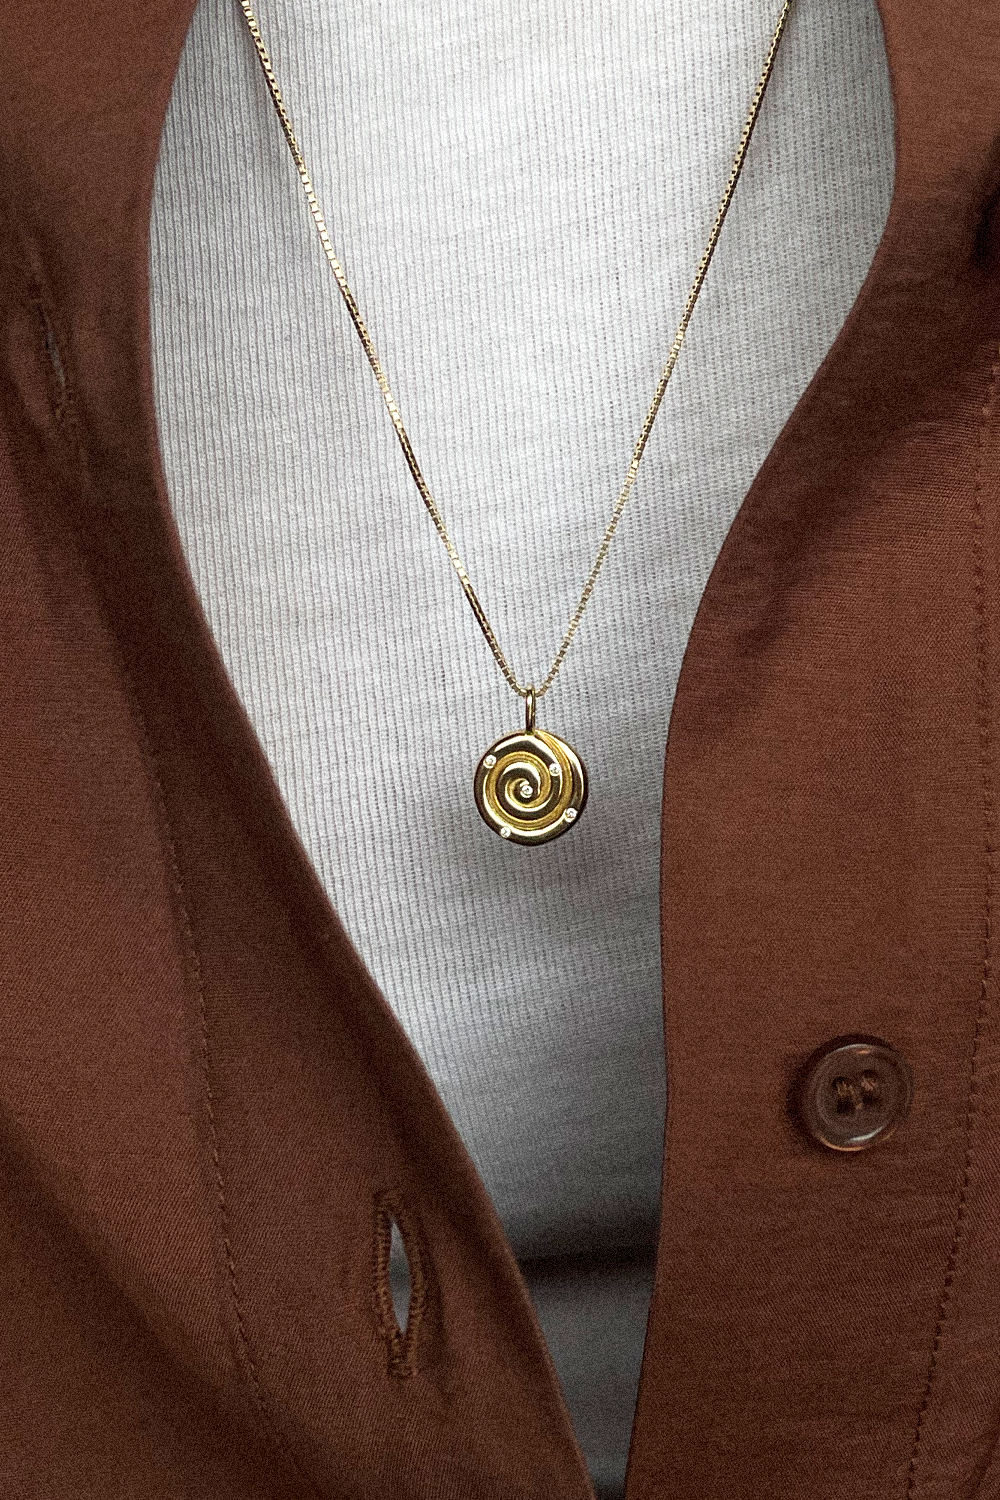 The Fine Gold Snail Charm